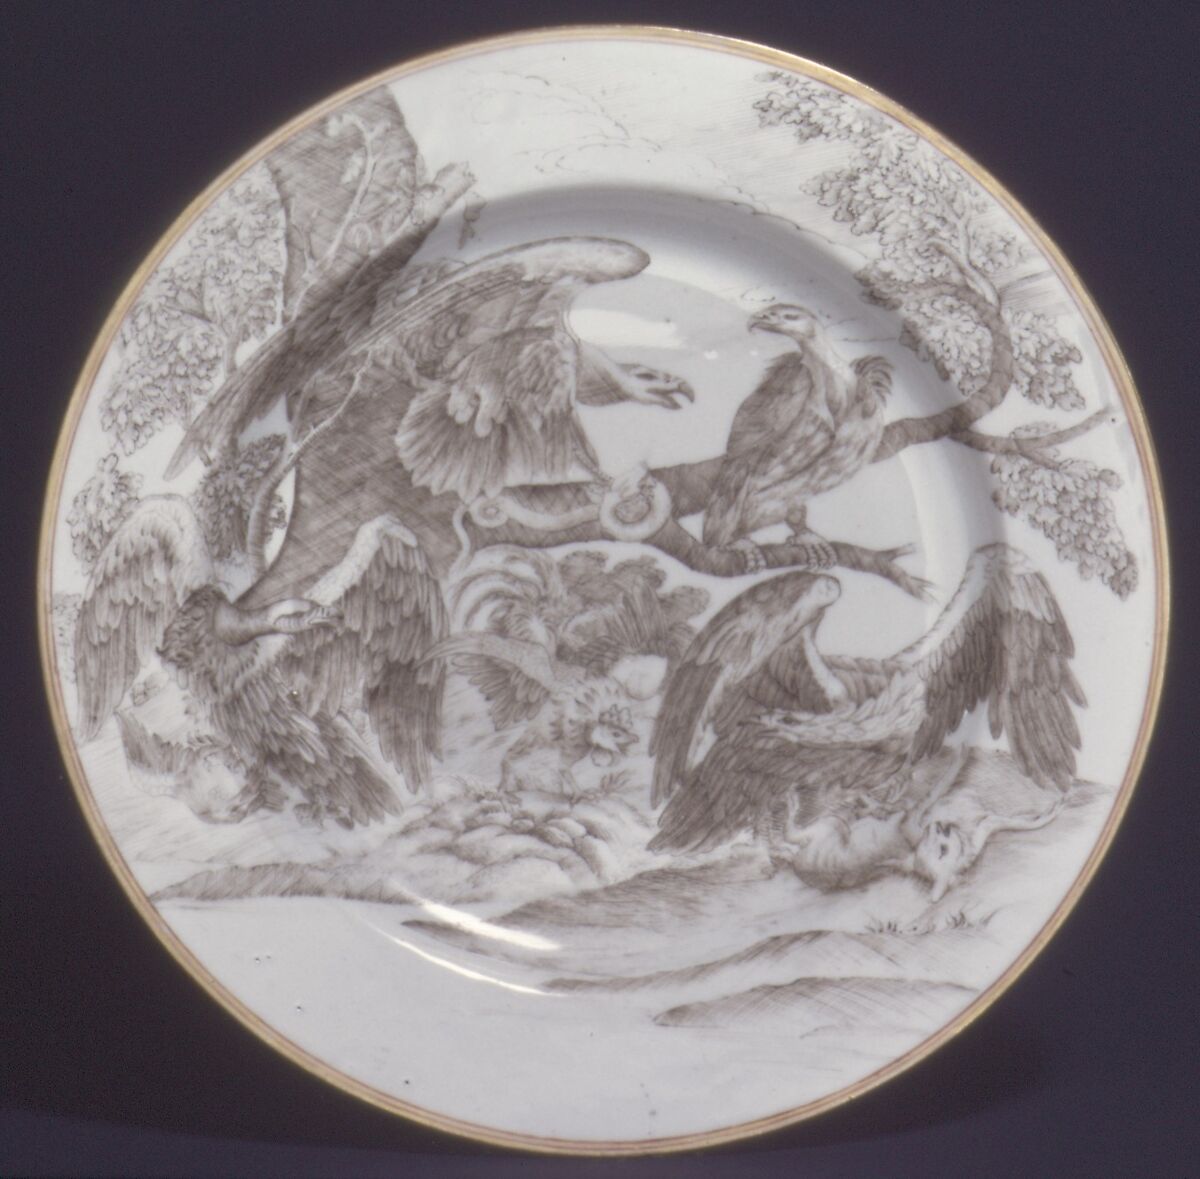 Plate (one of two), Decoration after a design by Pieter Boel (1622–1674), Hard-paste porcelain, Chinese, for British market 